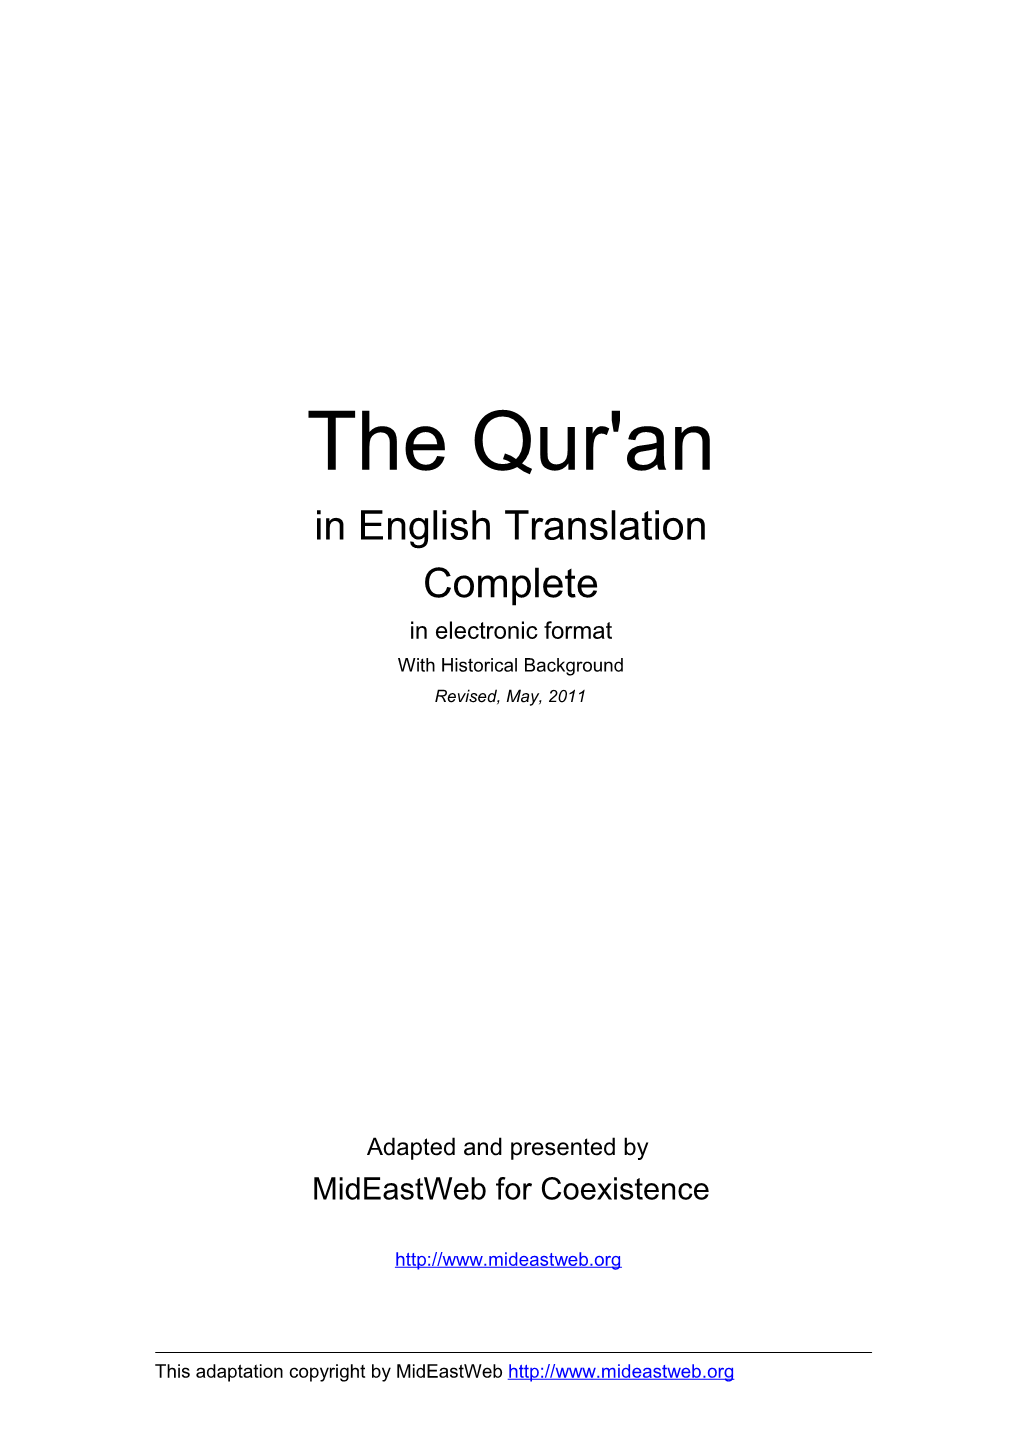 The Qur'an in English Translation Complete in Electronic Format with Historical Background Revised, May, 2011